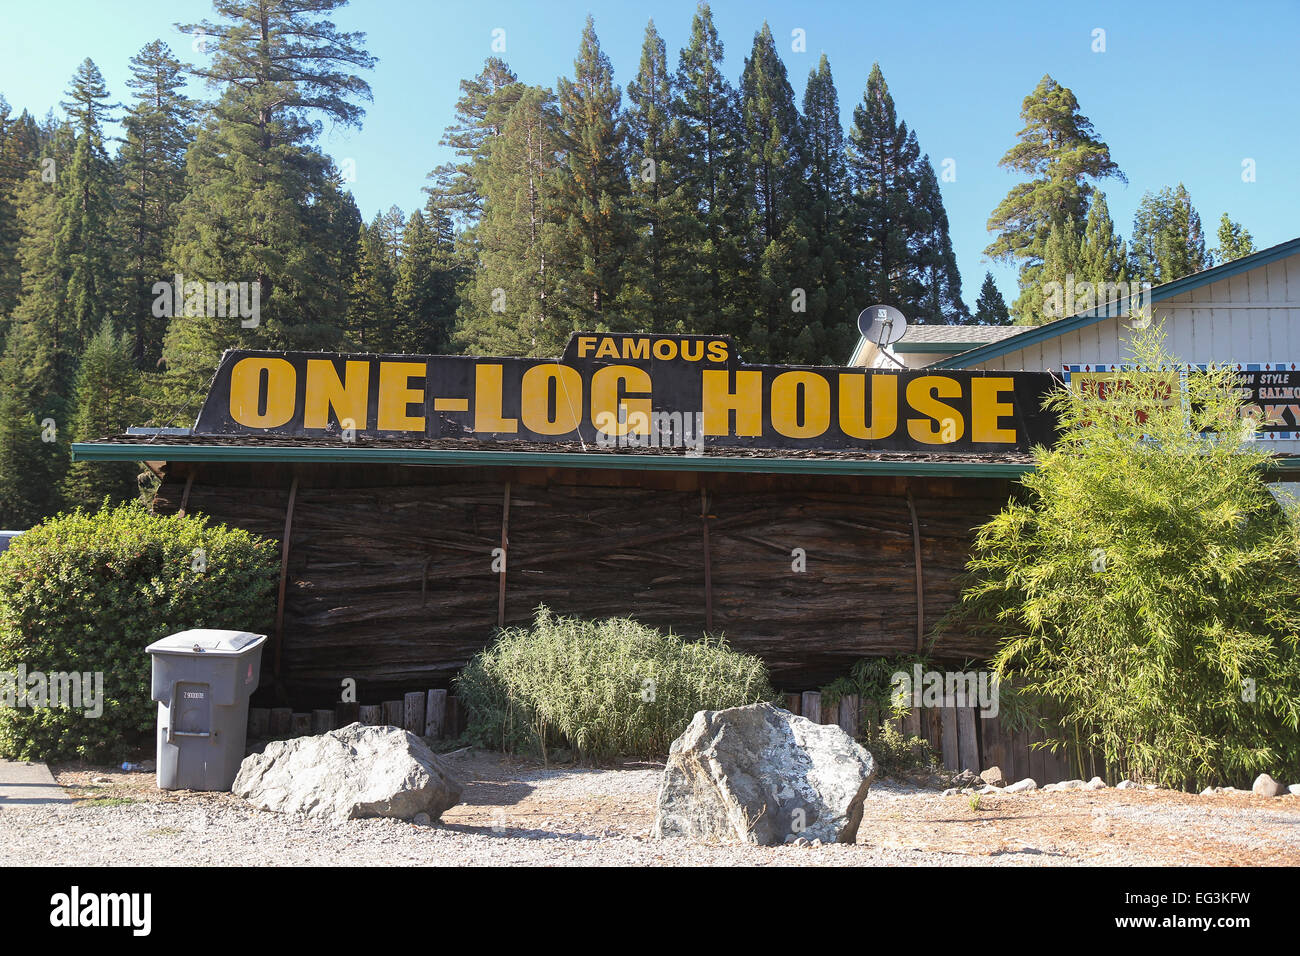 The One-Log House was created in 1946 from a redwood tree that was over 2100 years old. Garberville, California. Stock Photo